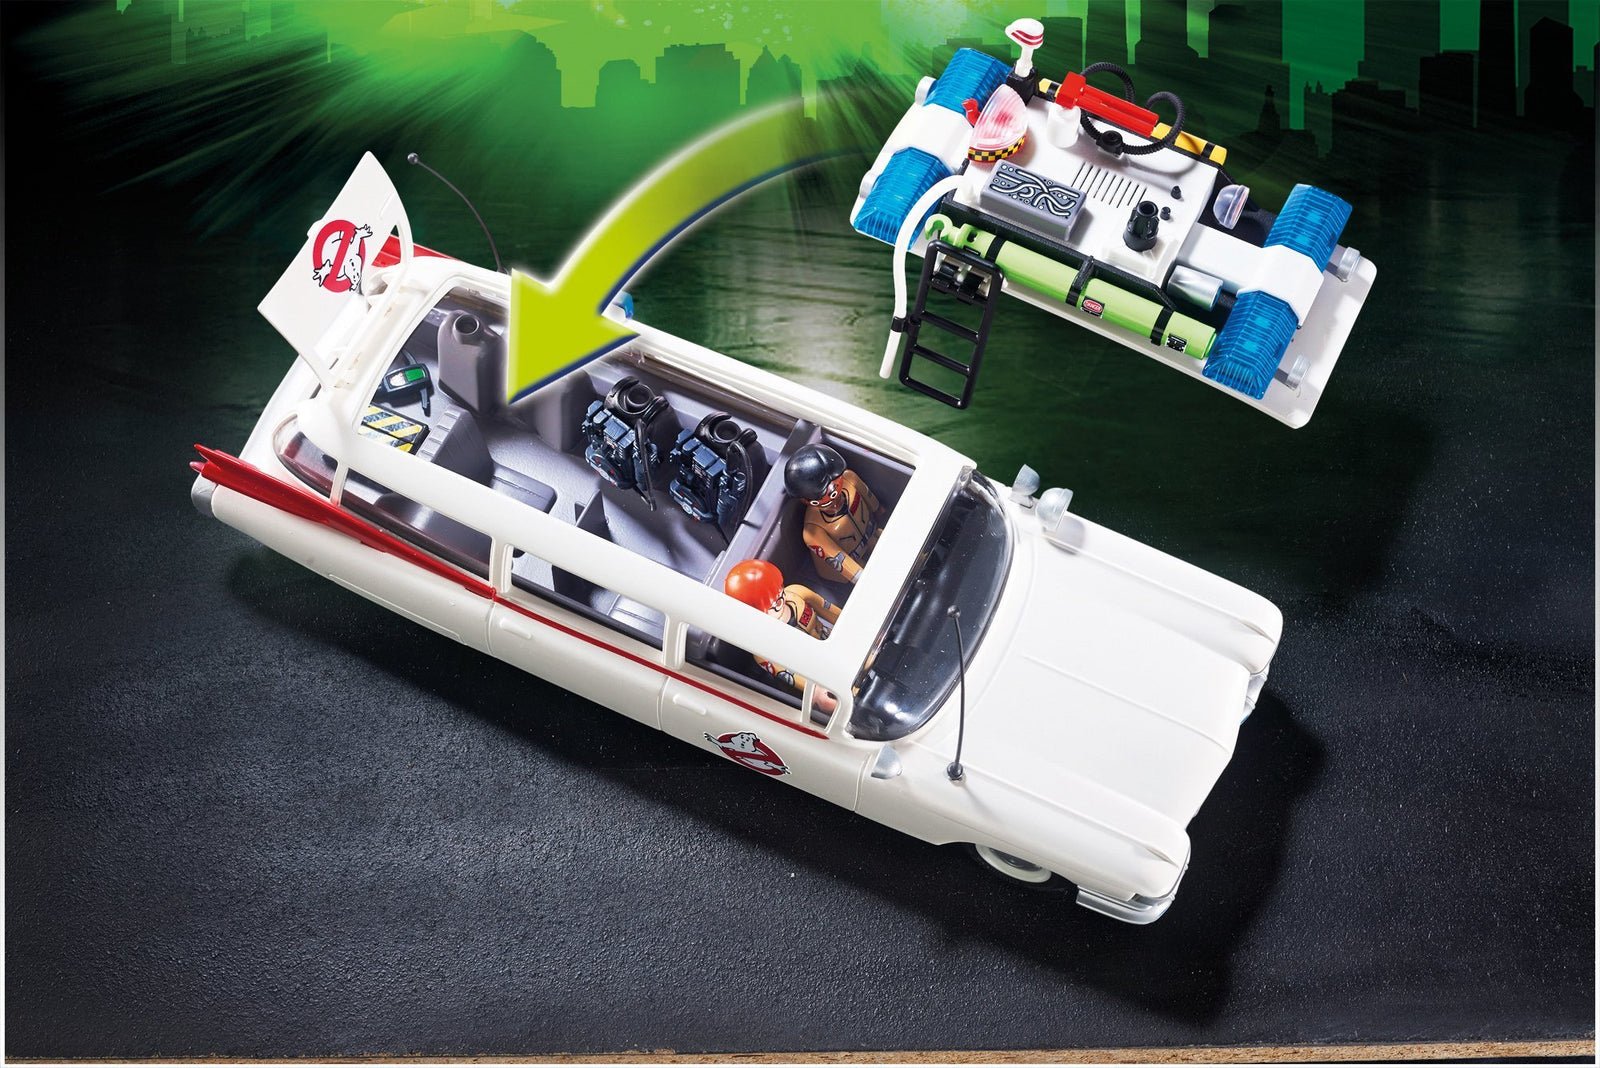 PLAYMOBIL Ghostbusters Ecto-1